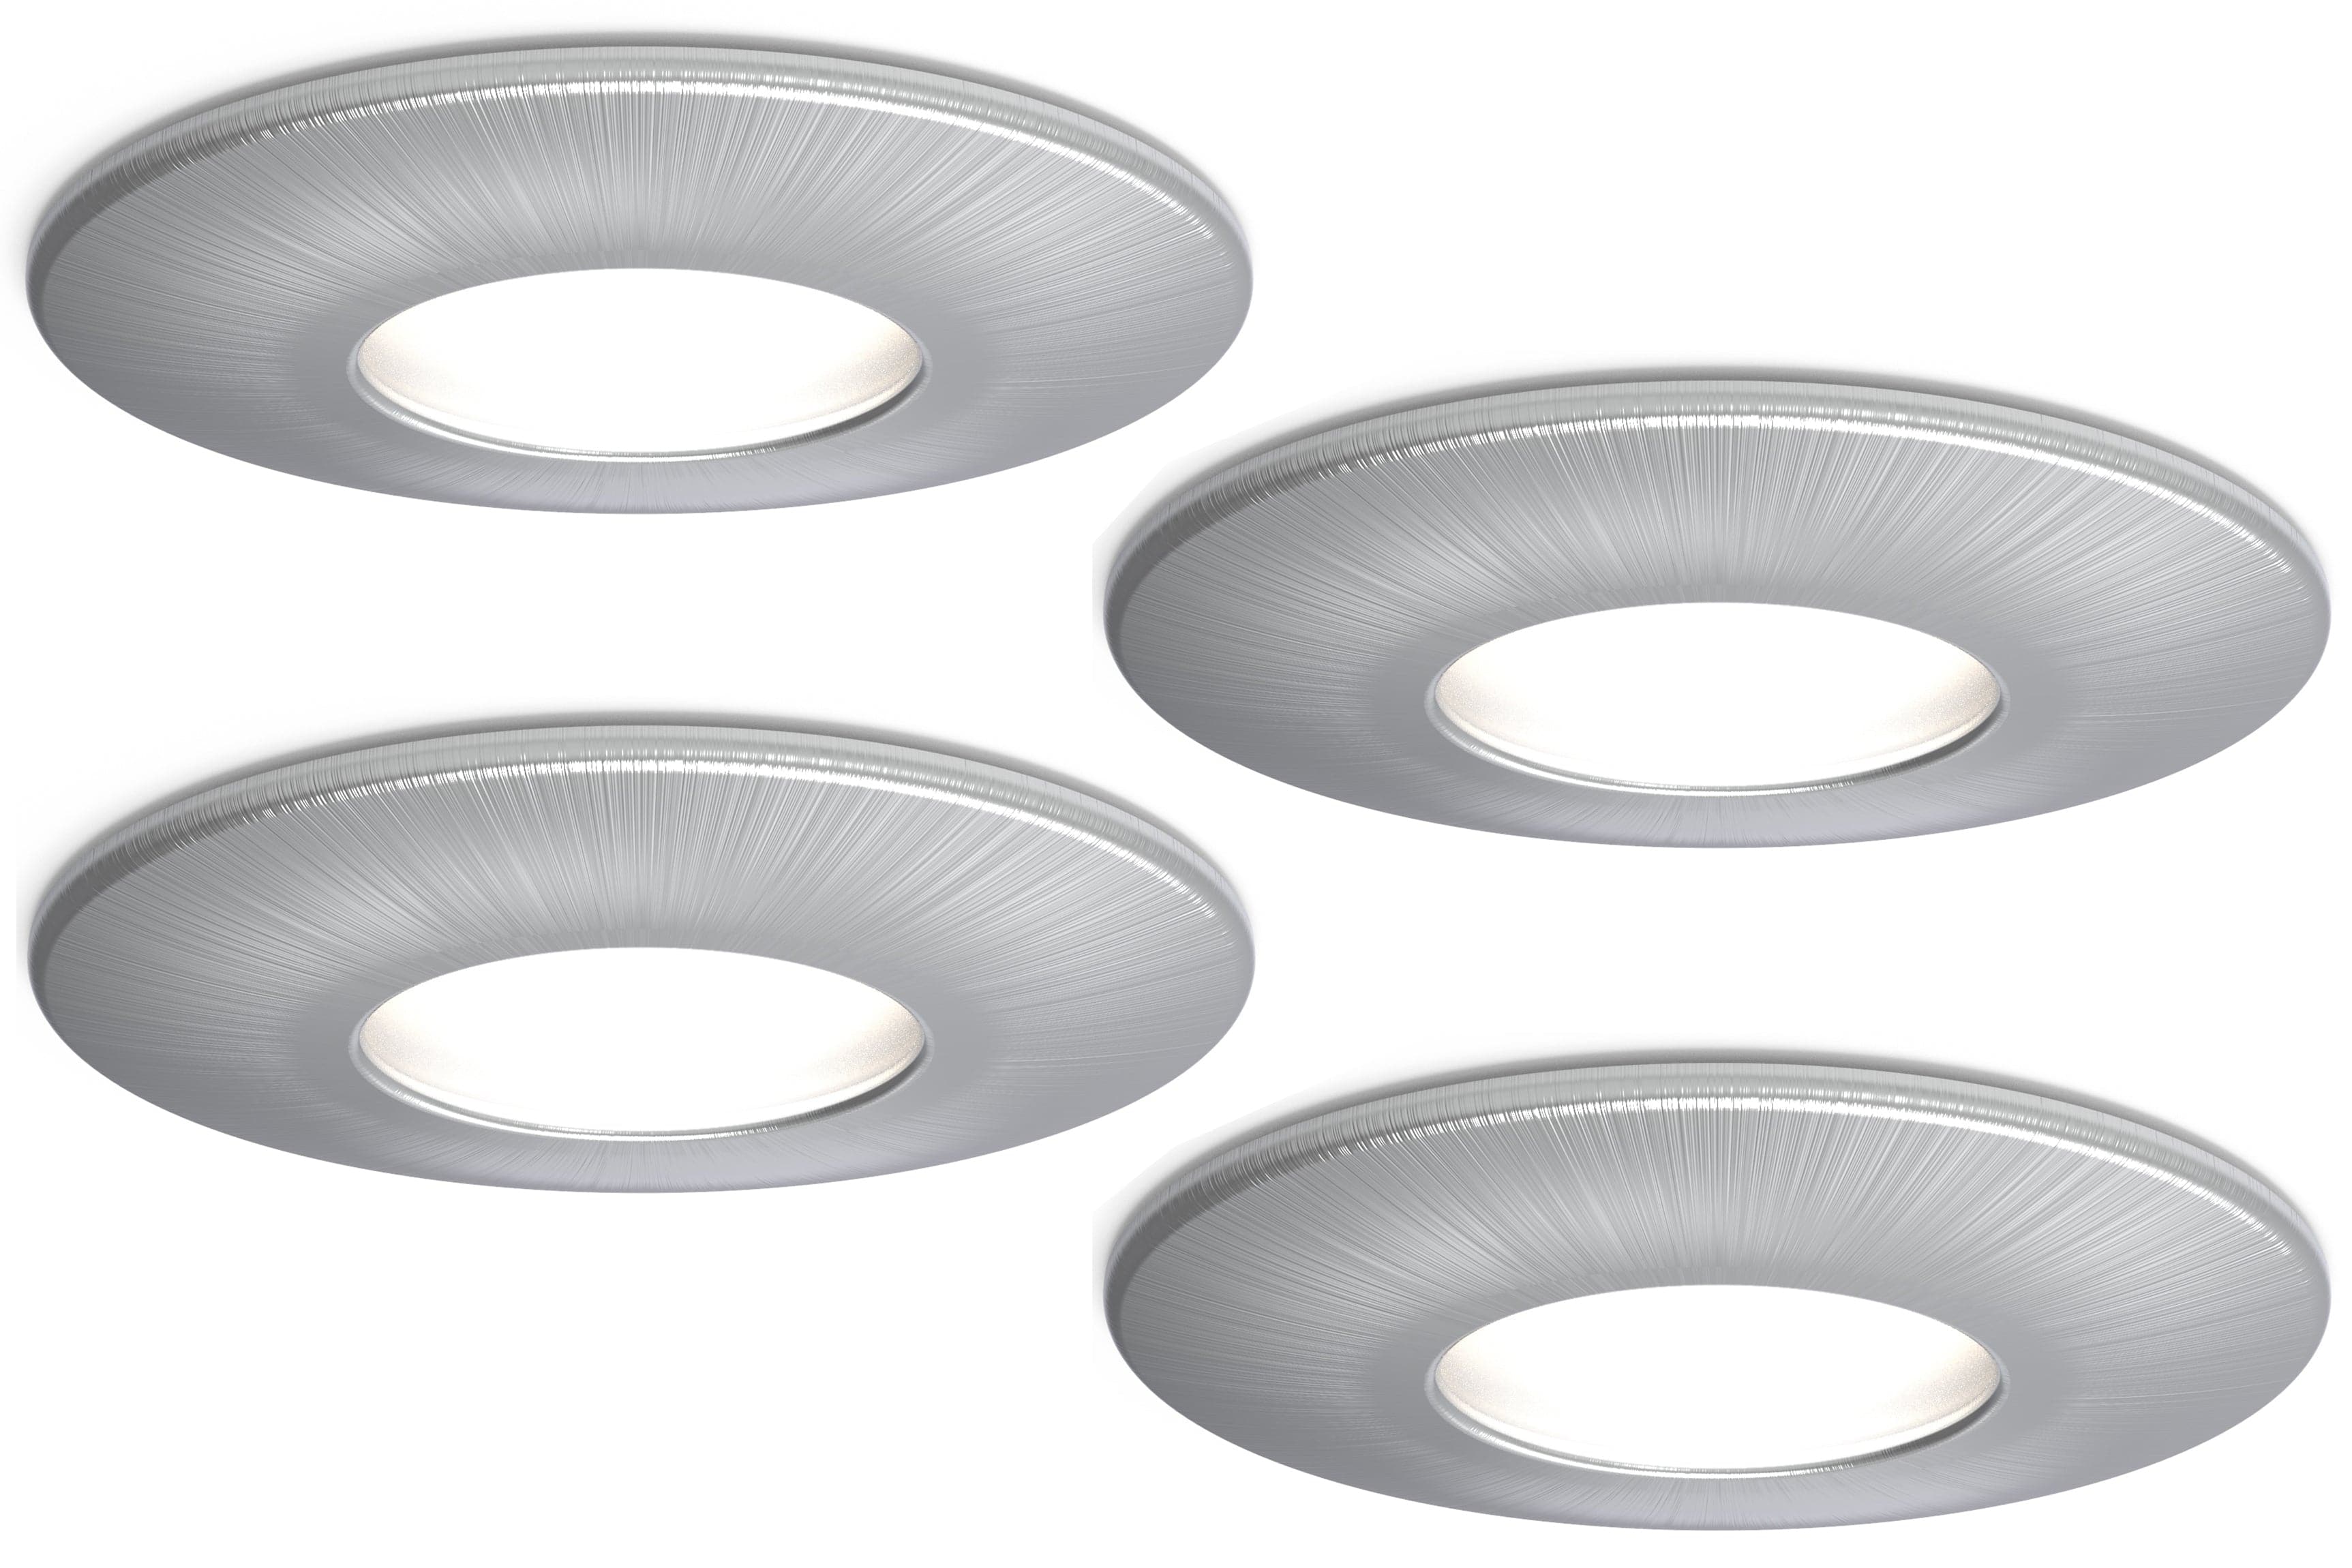 4lite IP20 GU10 Fire-Rated Downlight - Satin Chrome (Pack of 4)